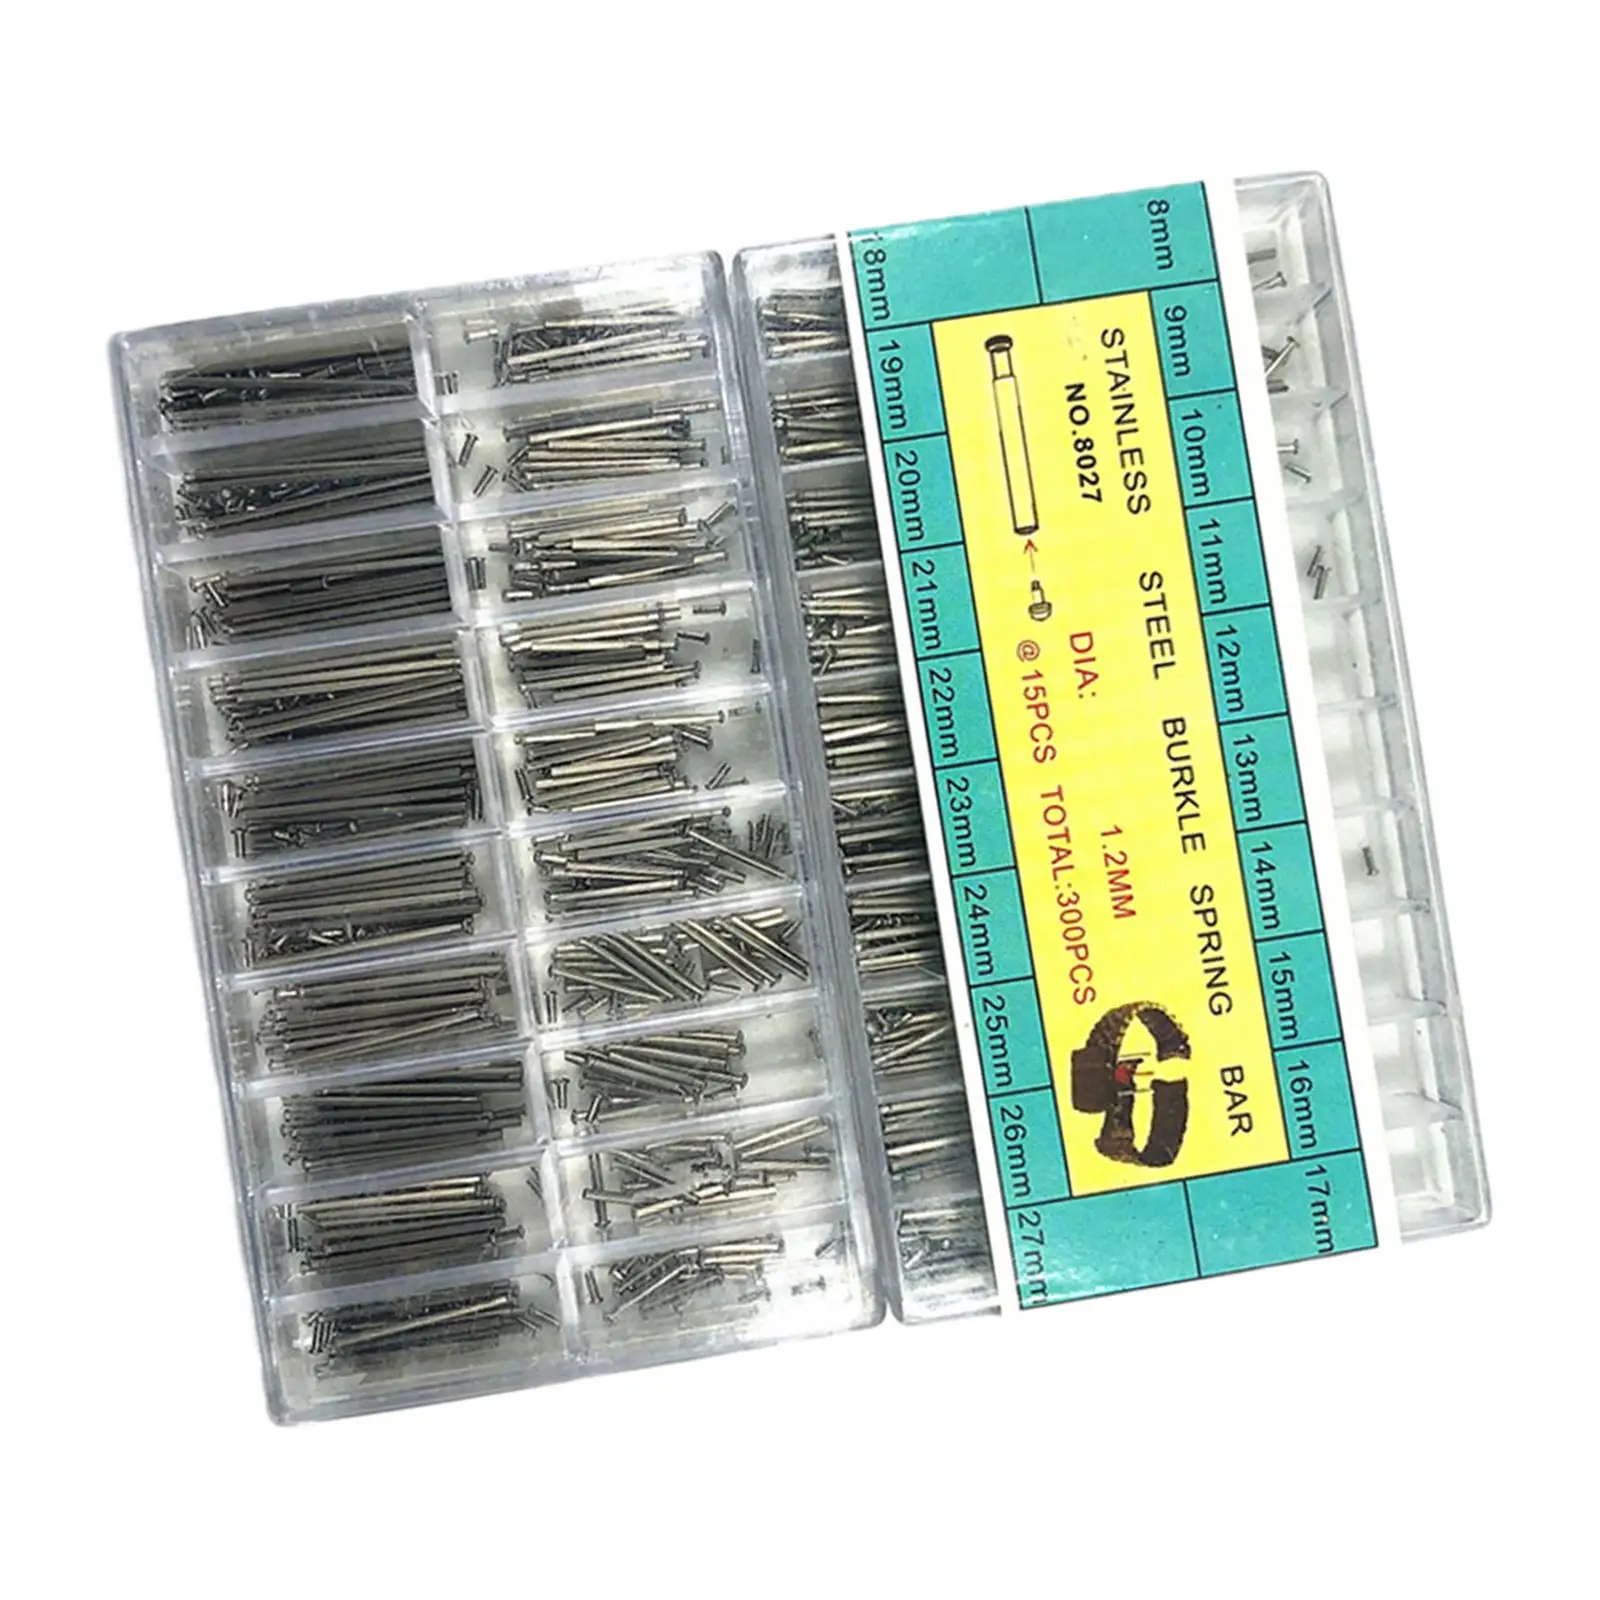 300Pcs Stainless Steel Watch Band Spring Bars 8-27mm Straight Pins with Storage Case Repair Kit 20 Sizes Jewelry Making